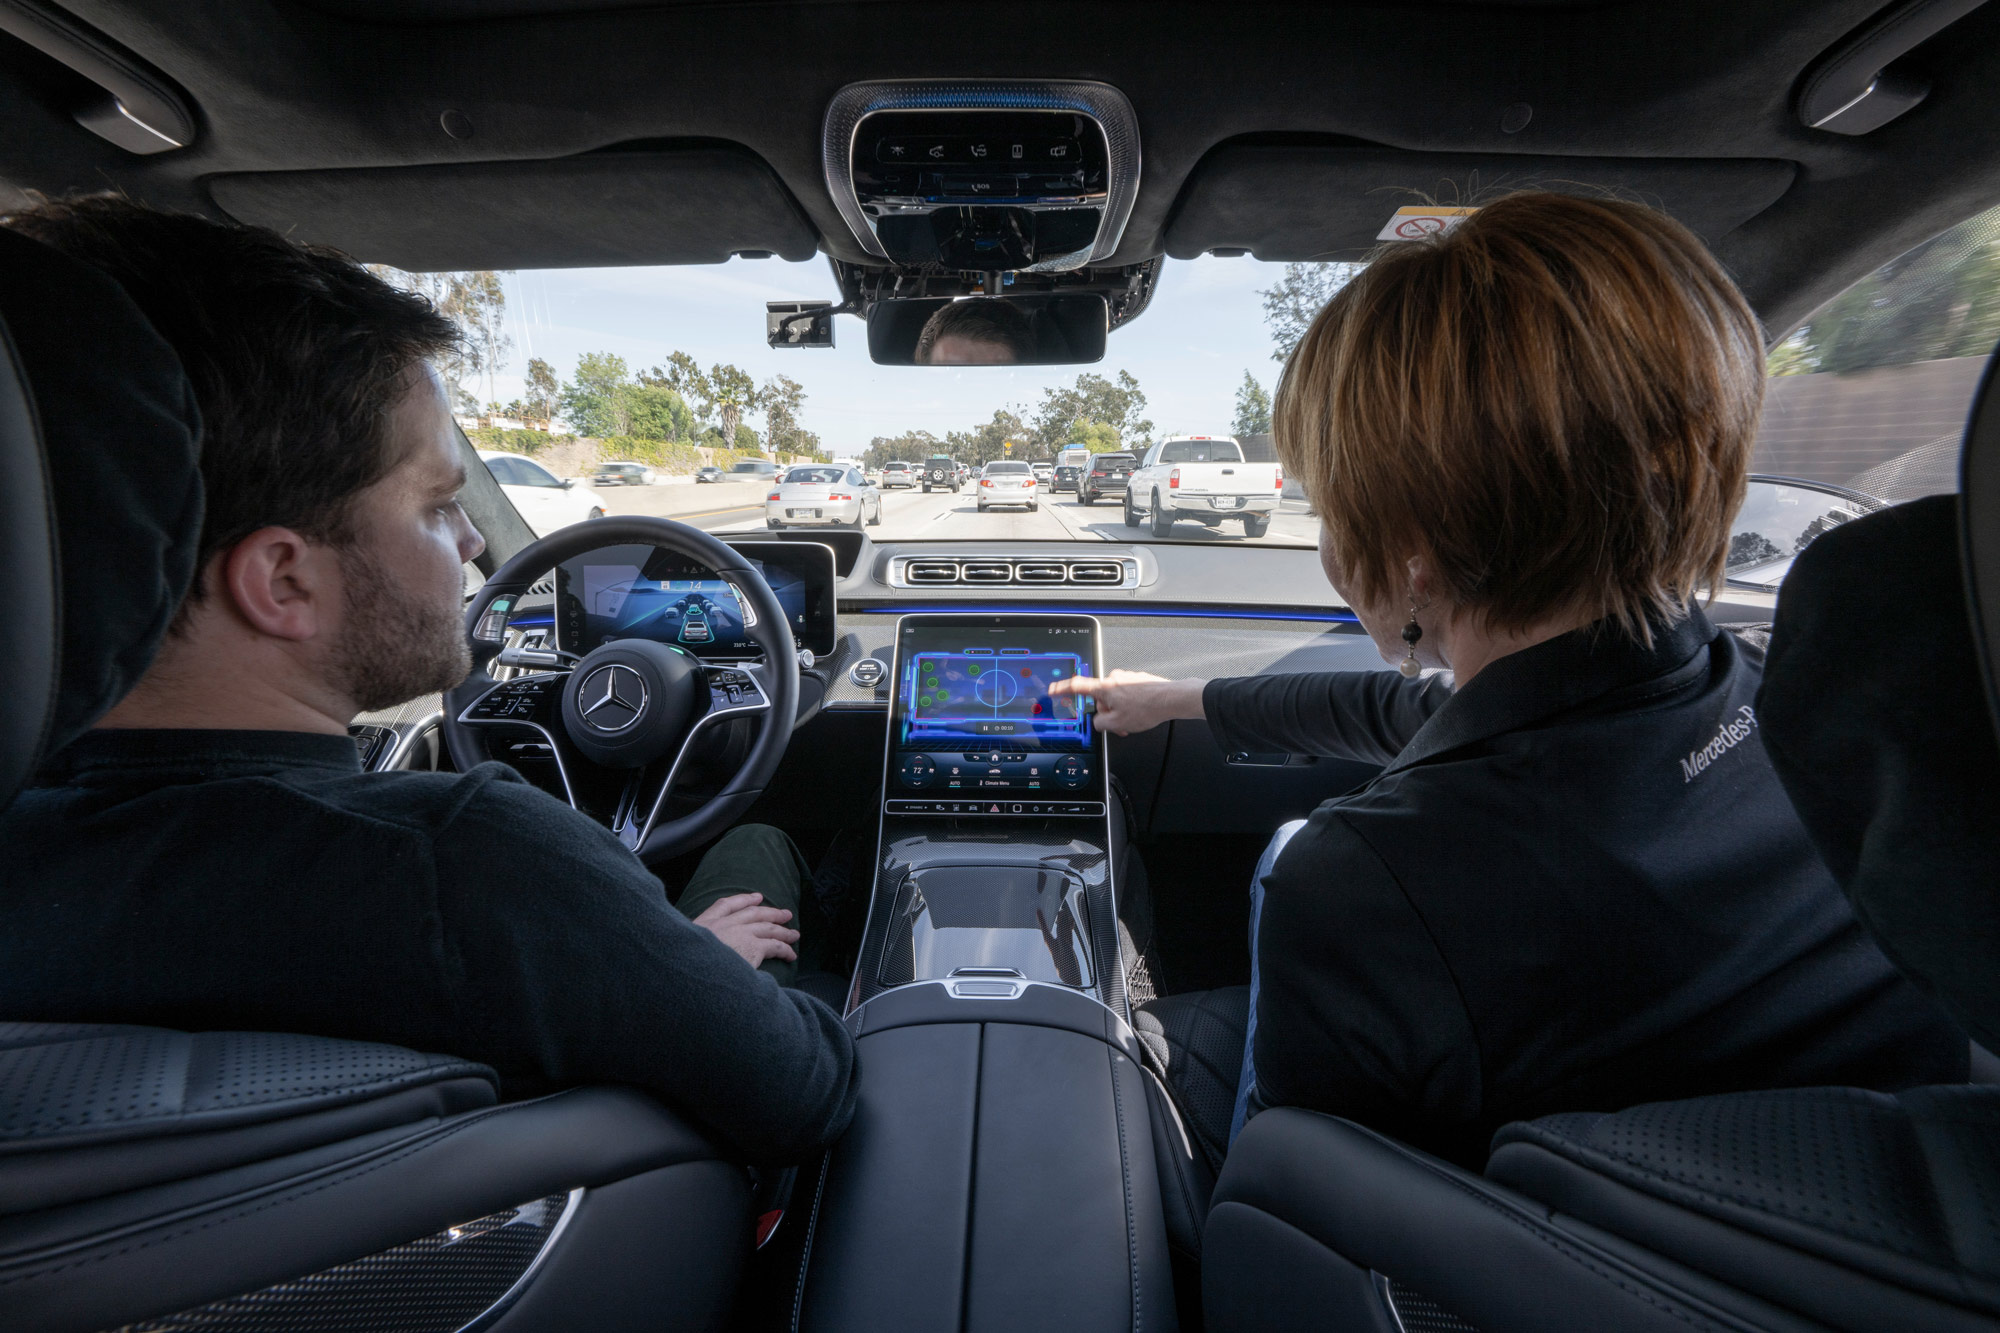 Two people demonstrate how Level 3 autonomous driving works in a Mercedes-Benz.